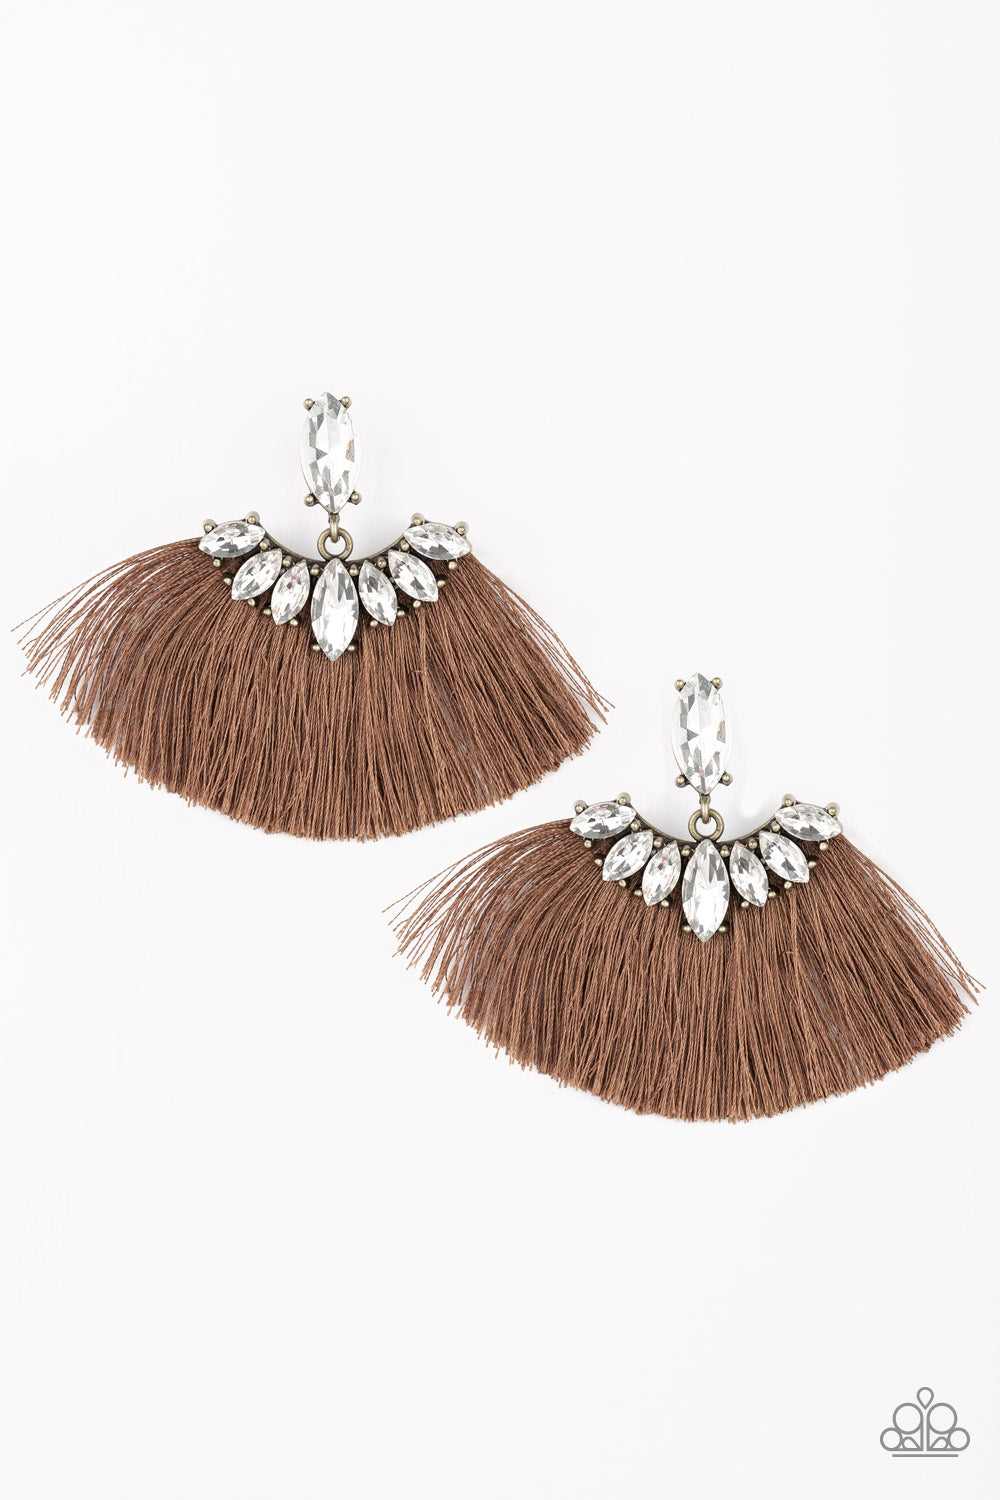 Formal Flair Brown Paparazzi Earrings Cashmere Pink Jewels - Cashmere Pink Jewels & Accessories, Cashmere Pink Jewels & Accessories - Paparazzi